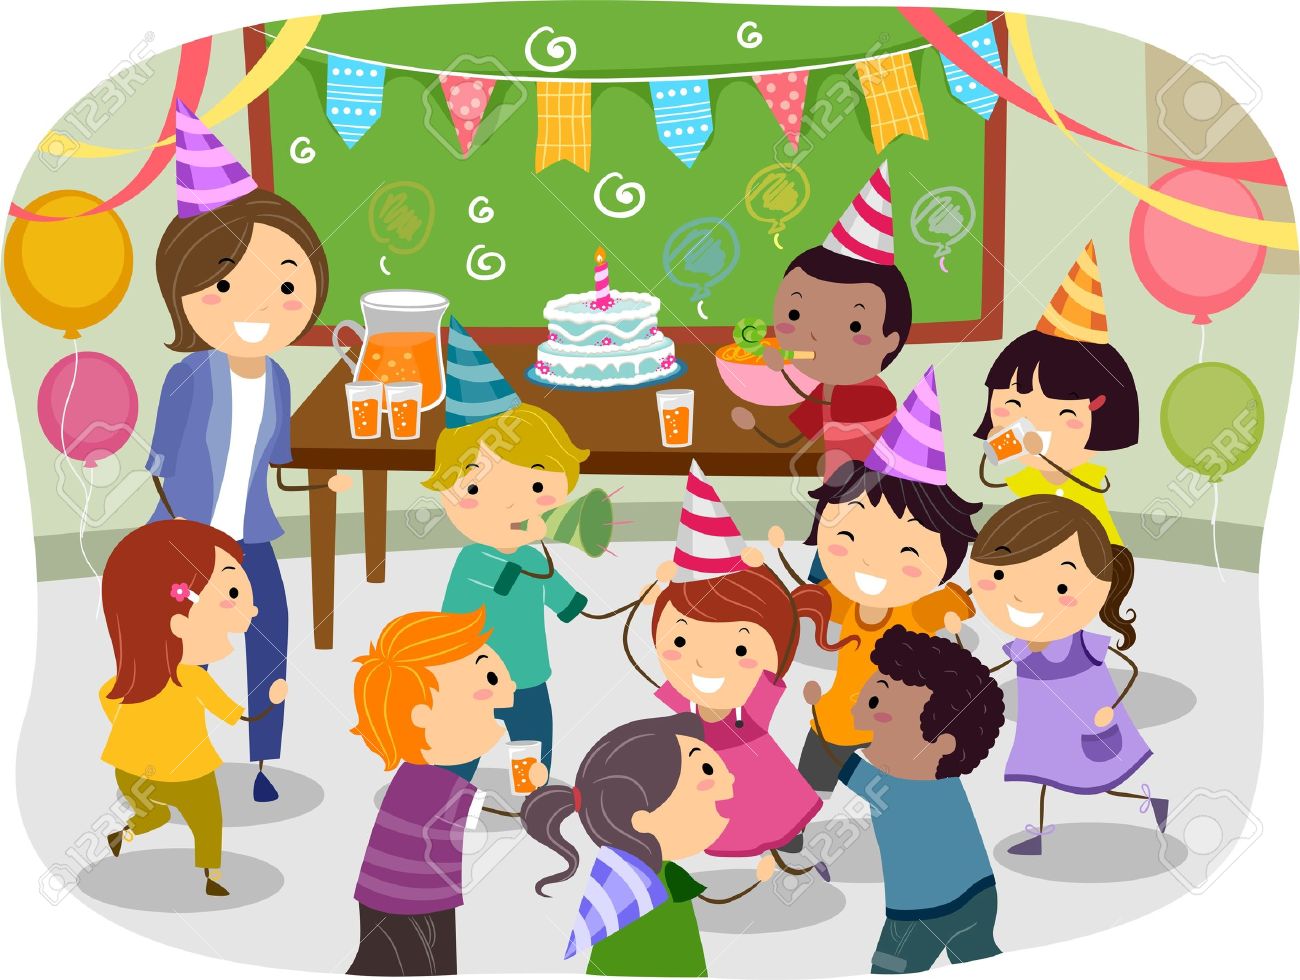 Free Cliparts Birthday Party, Download Free Cliparts Birthday Party png